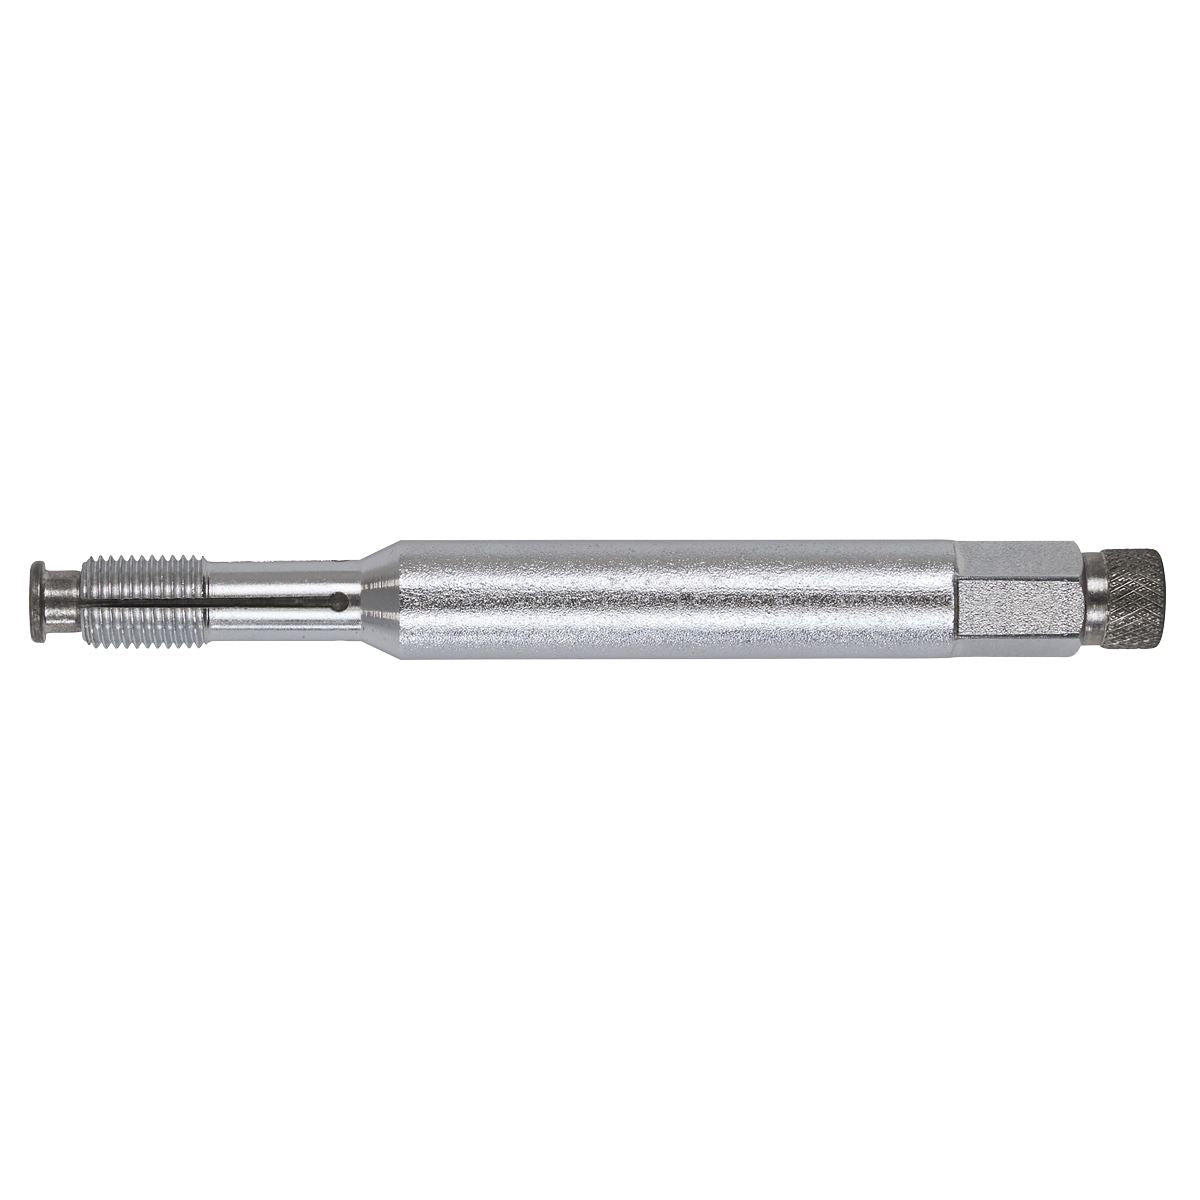 Sealey Reverse Action Spark Plug Thread Chaser 12mm